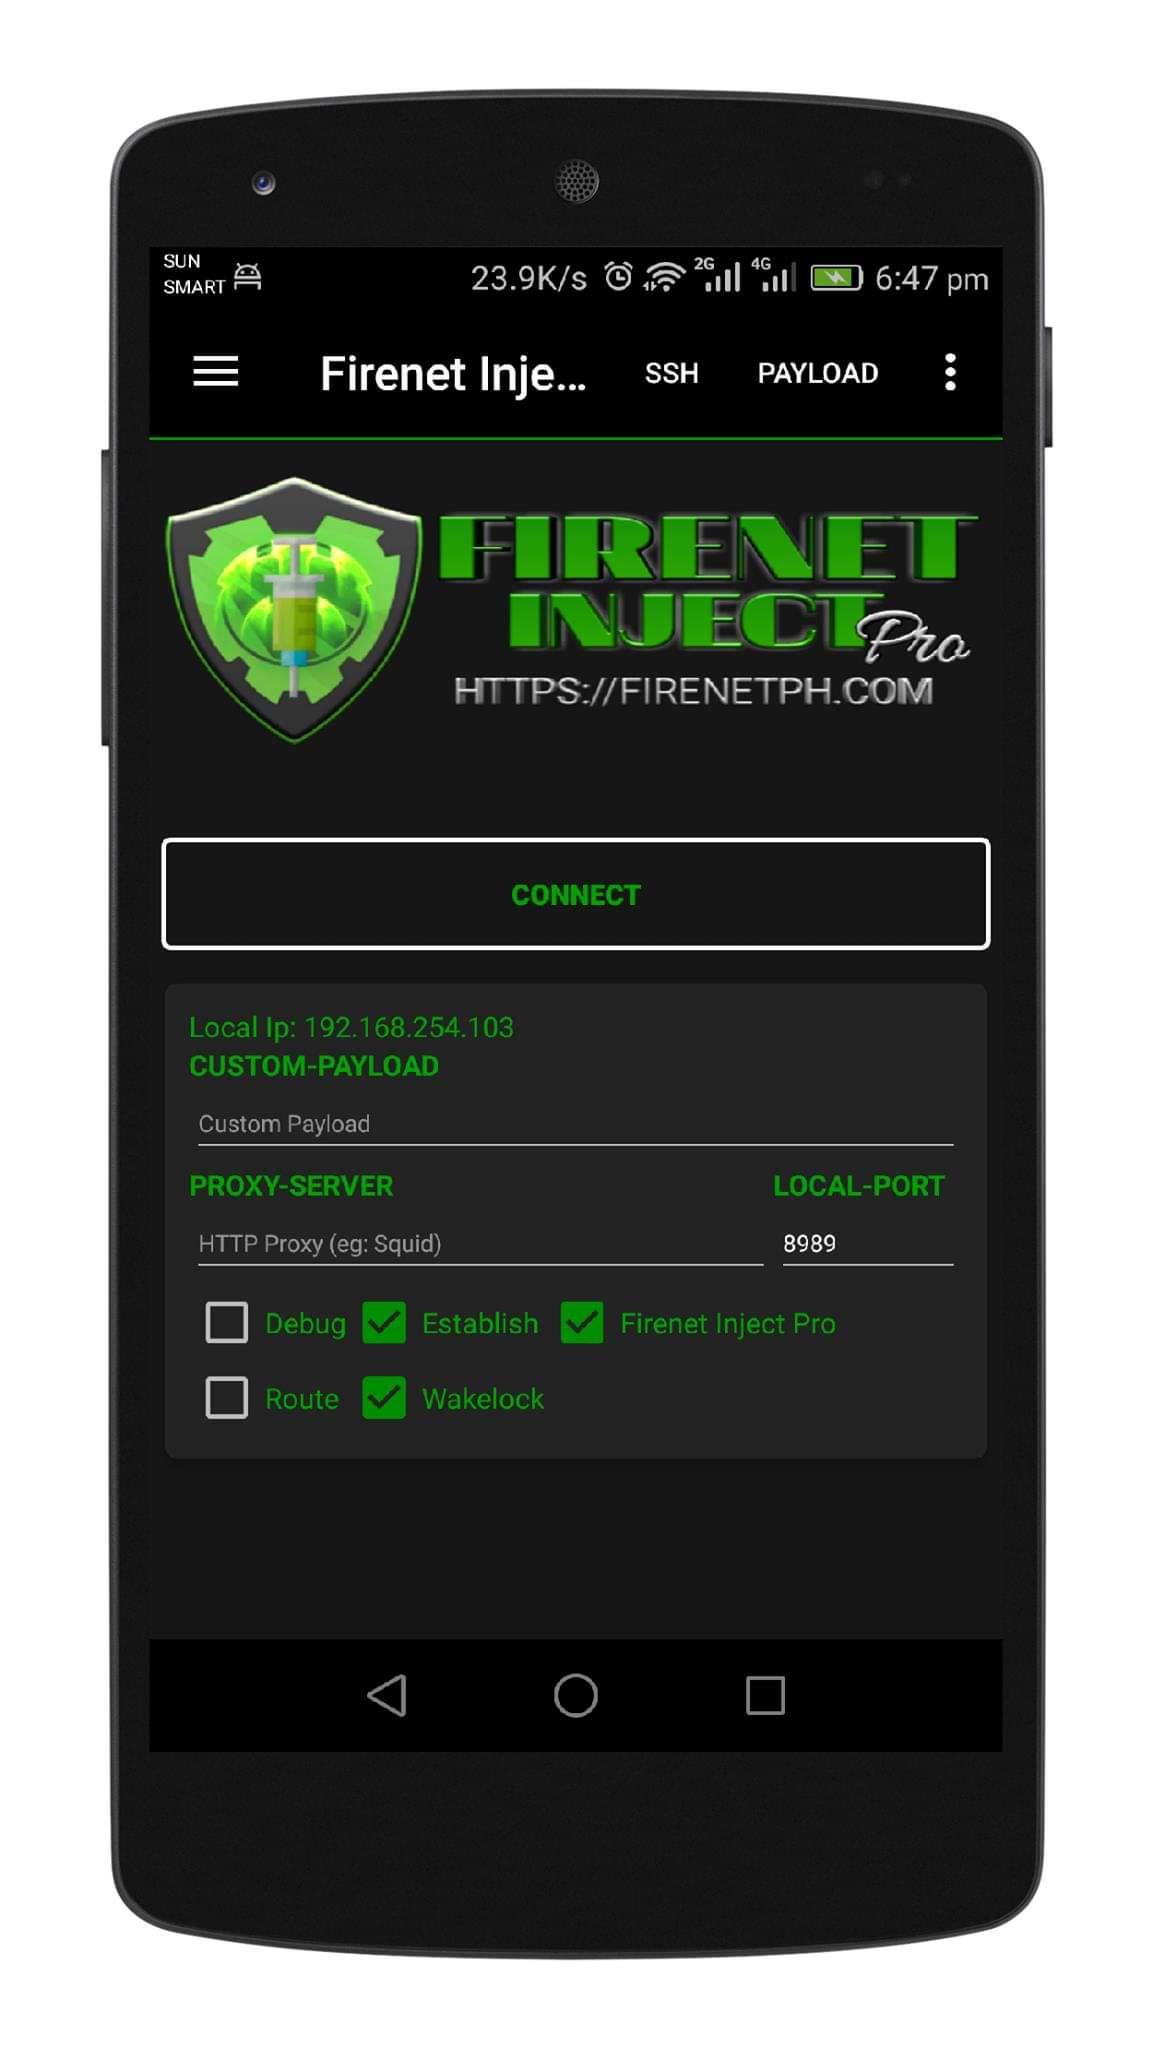 FIRENET INJECT PRO for Android - APK Download - 